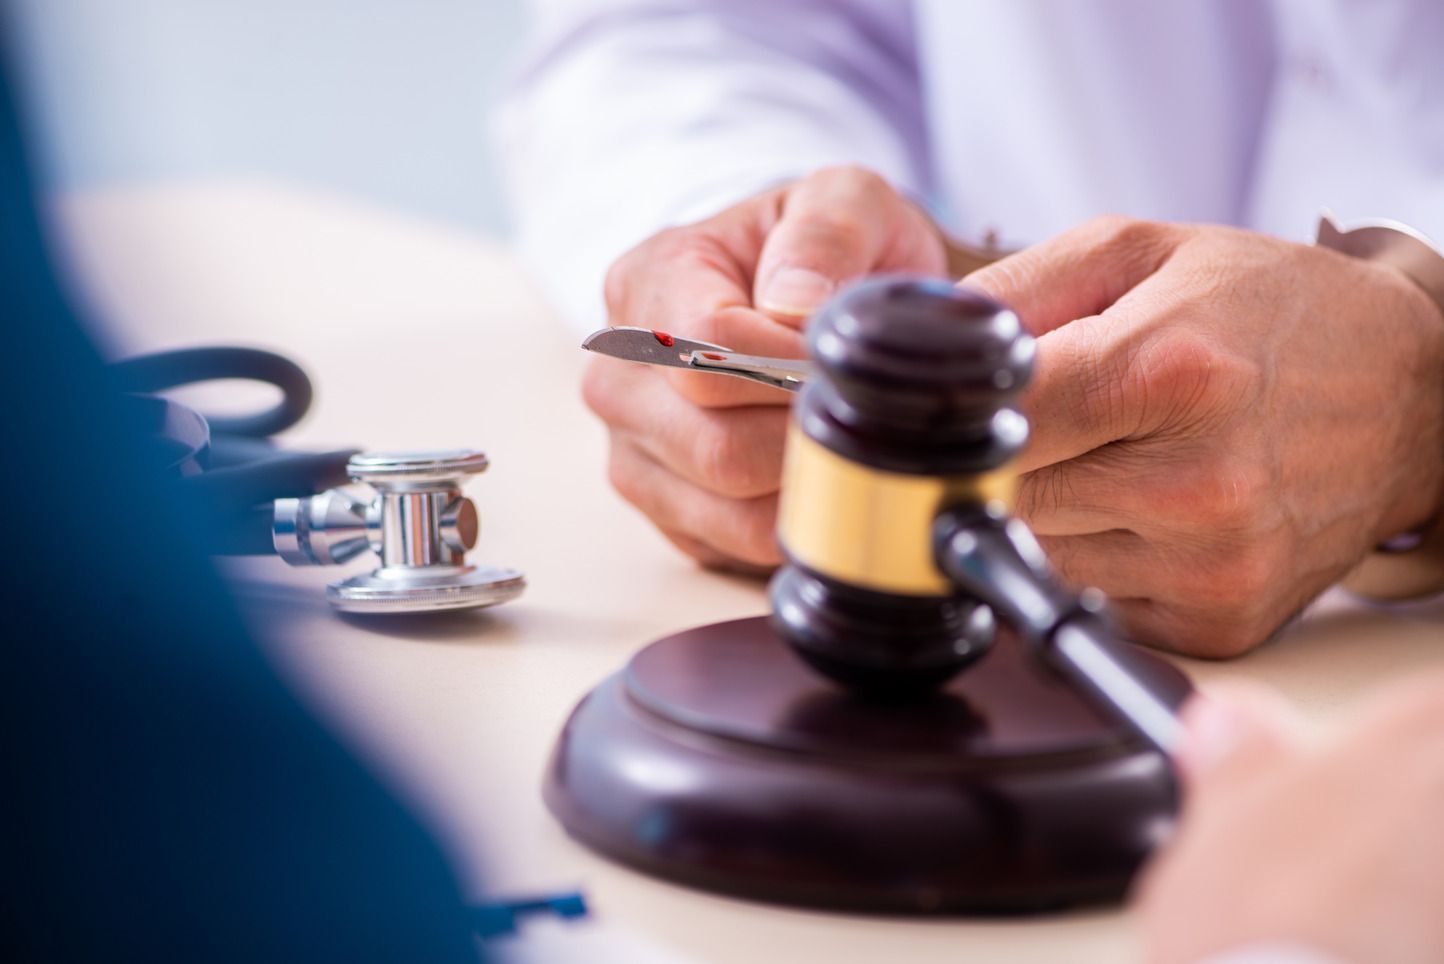 history of medical malpractice in the United States